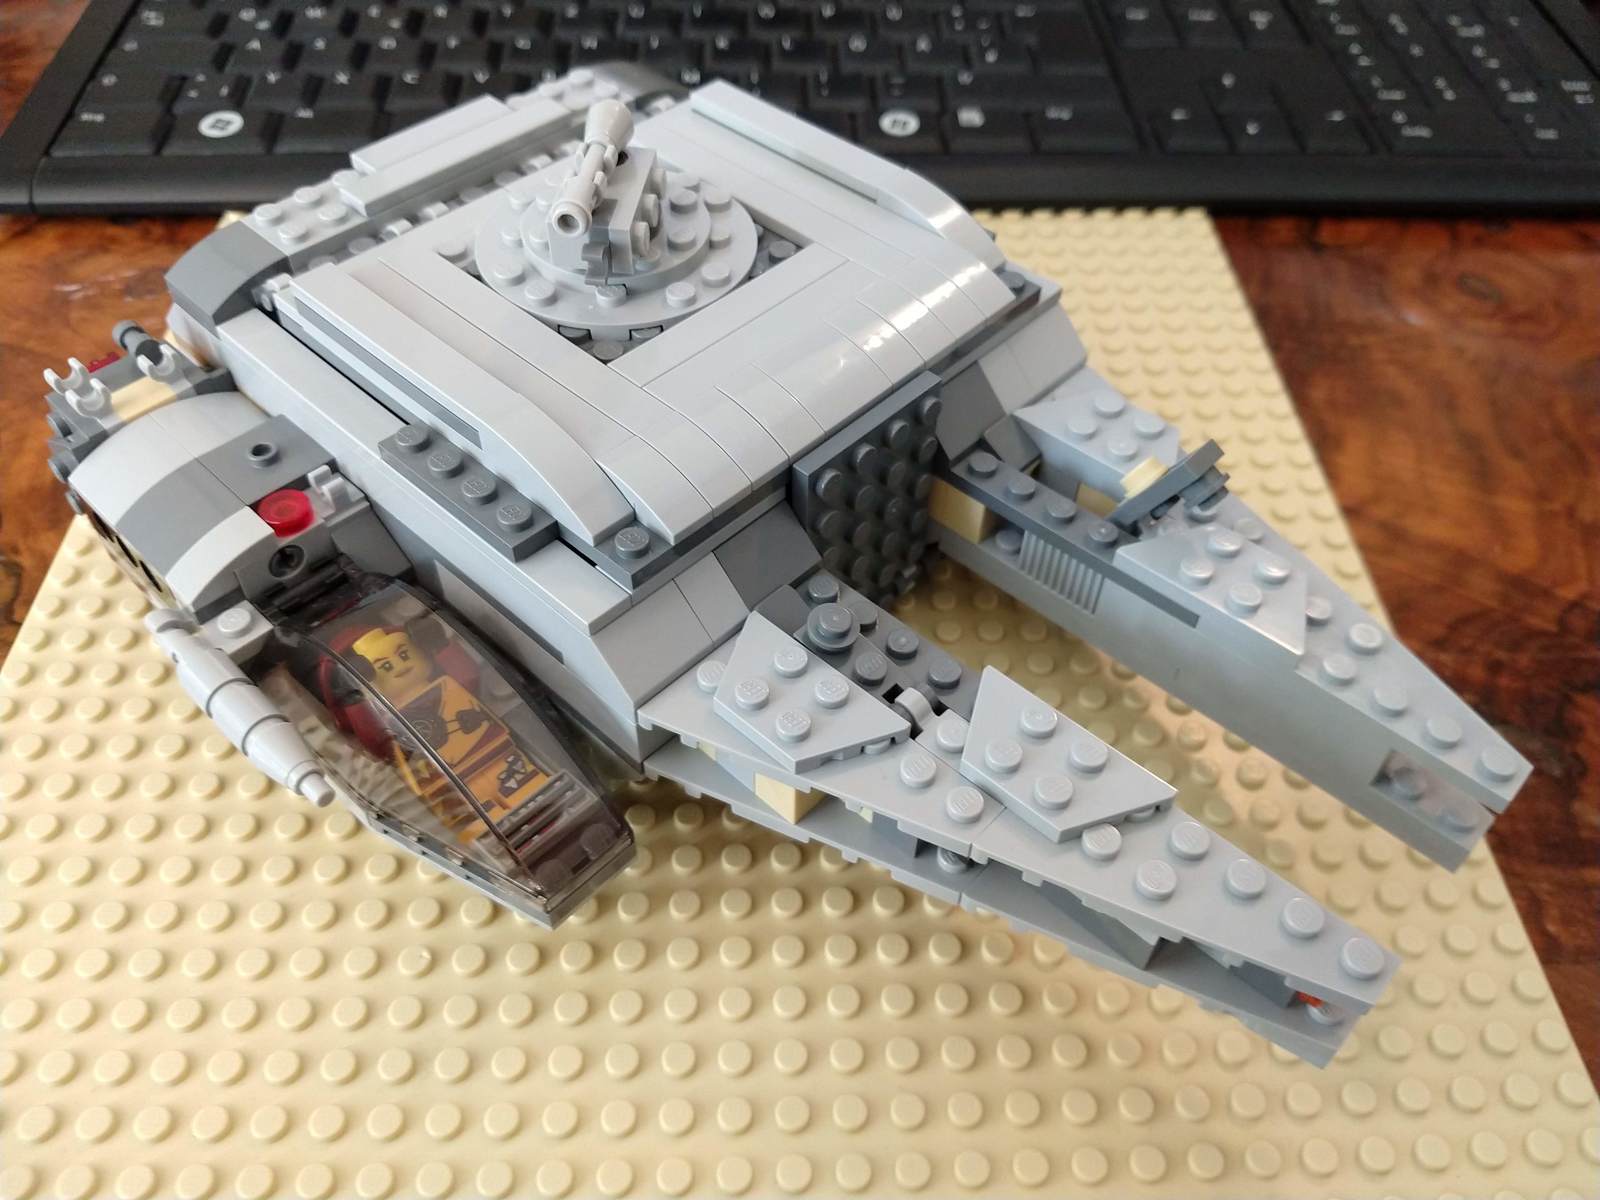 The Square Falcon with the Needle as the cockpit pod